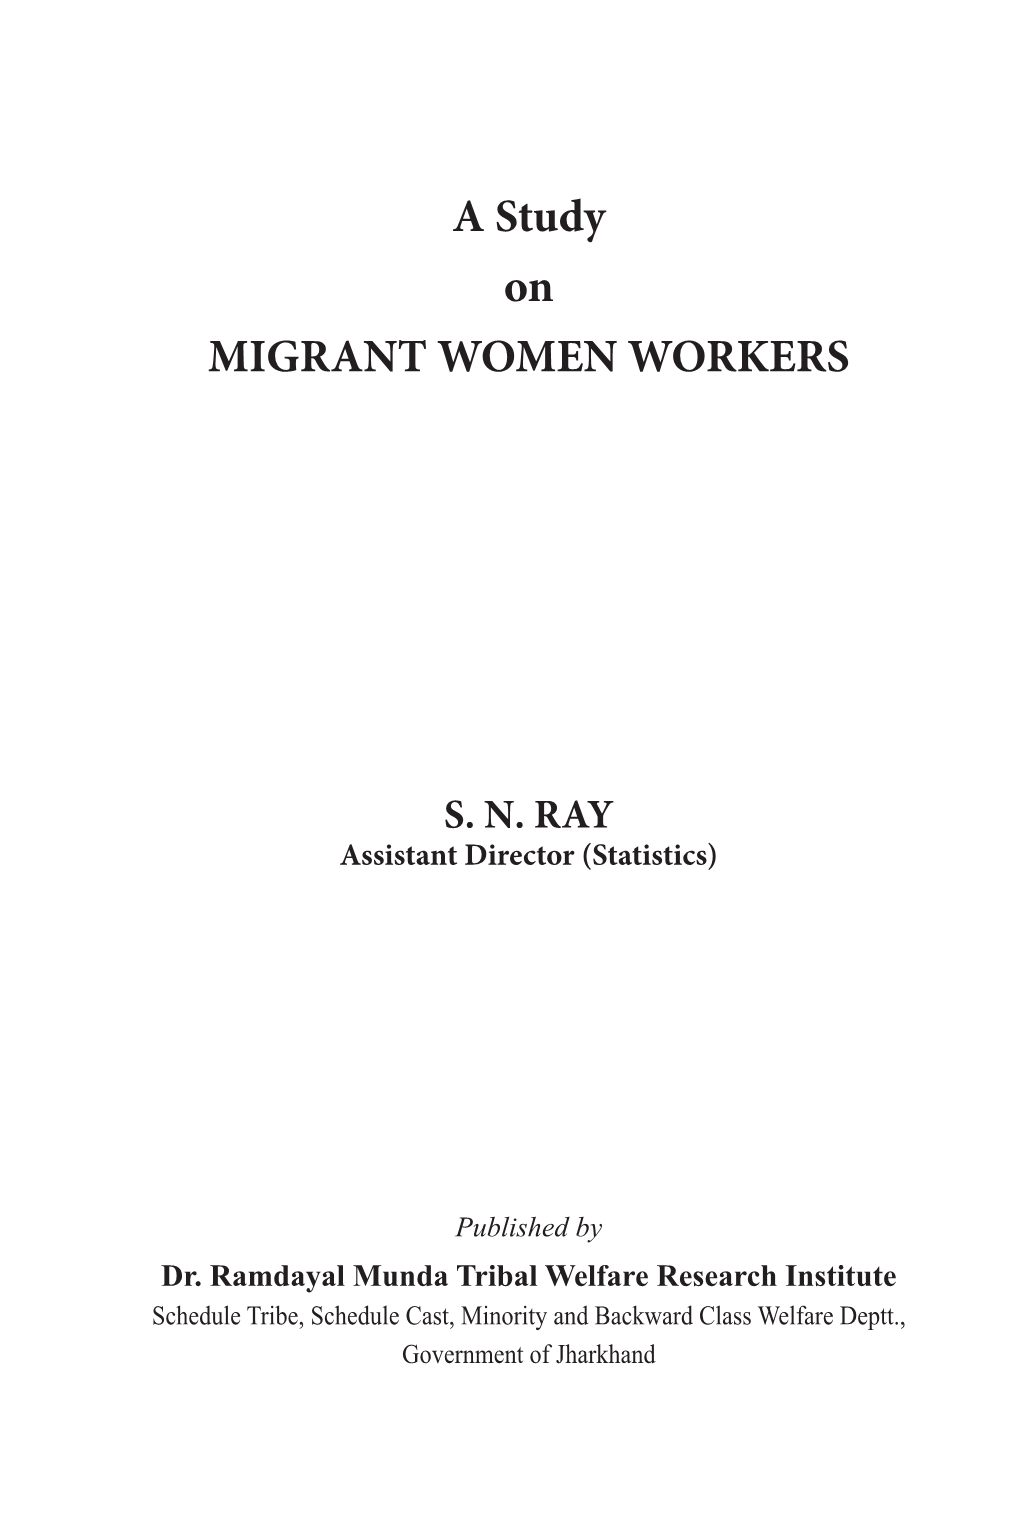 A Study on MIGRANT WOMEN WORKERS